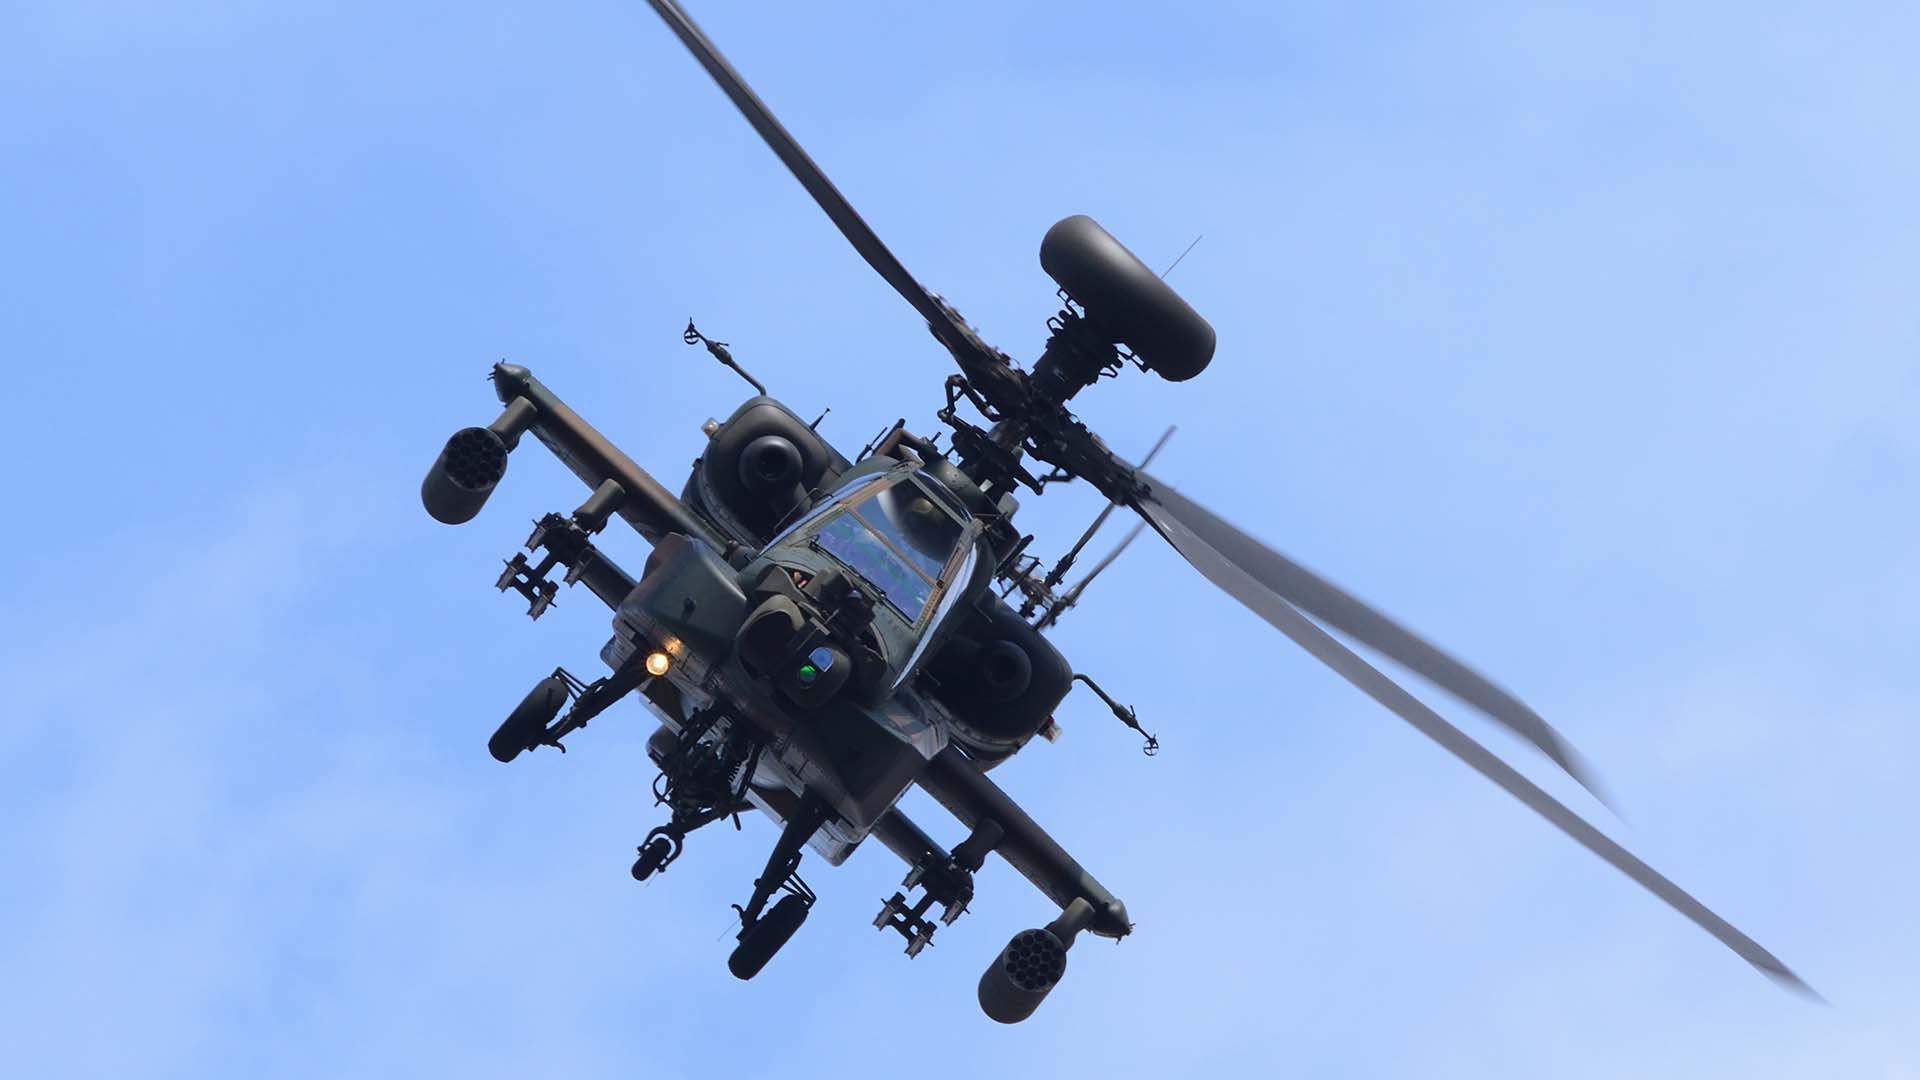 AH-64 Apache helicopter